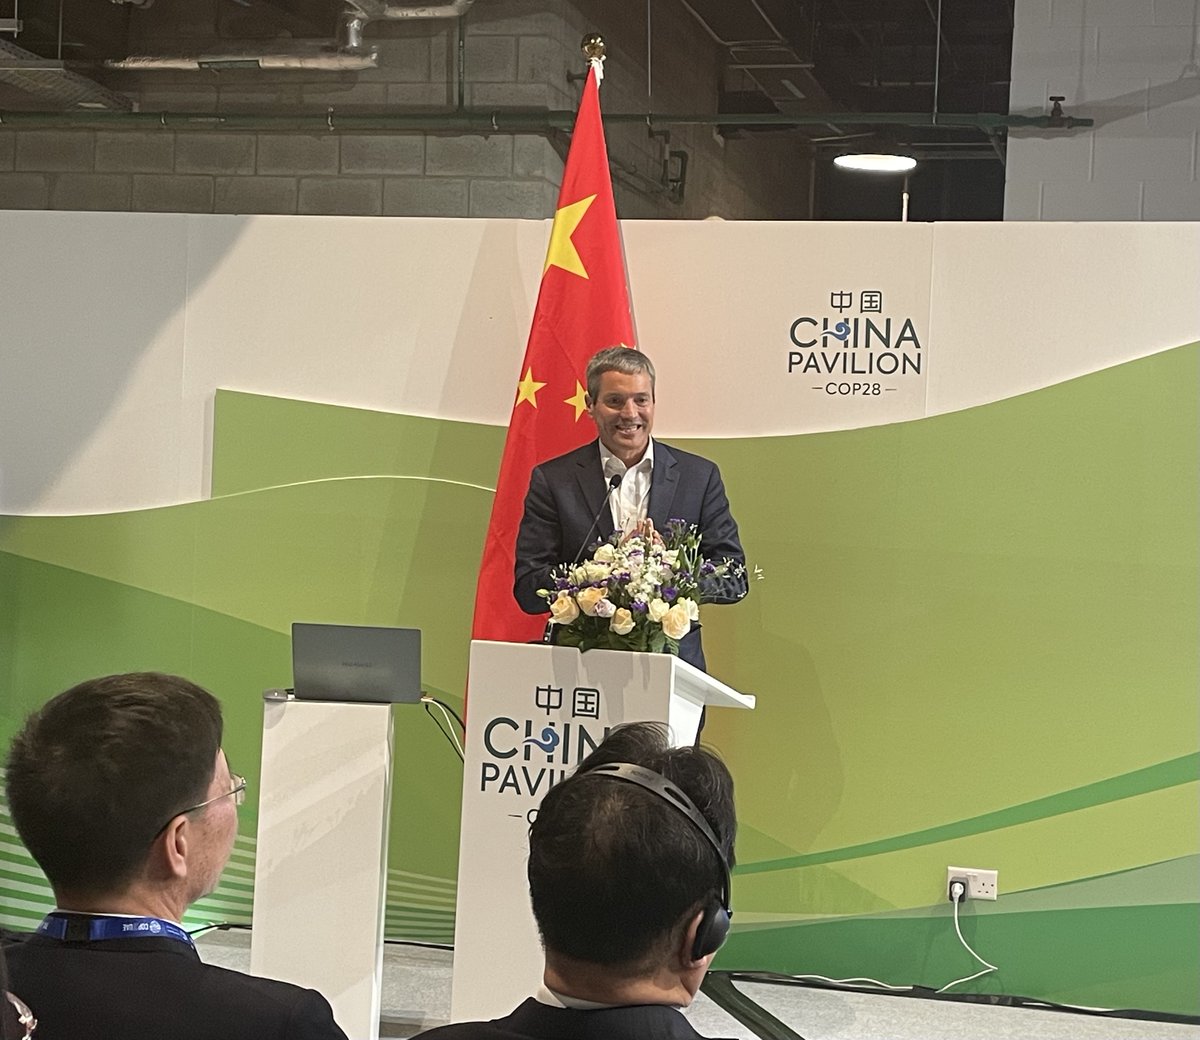 #Under2Coalition co-chair California has also been speaking at Jiangsu’s event, expressing his hope that both states reach 30by30 - protecting ecosystems on land and at sea @WadeCrowfoot #COP28 #China